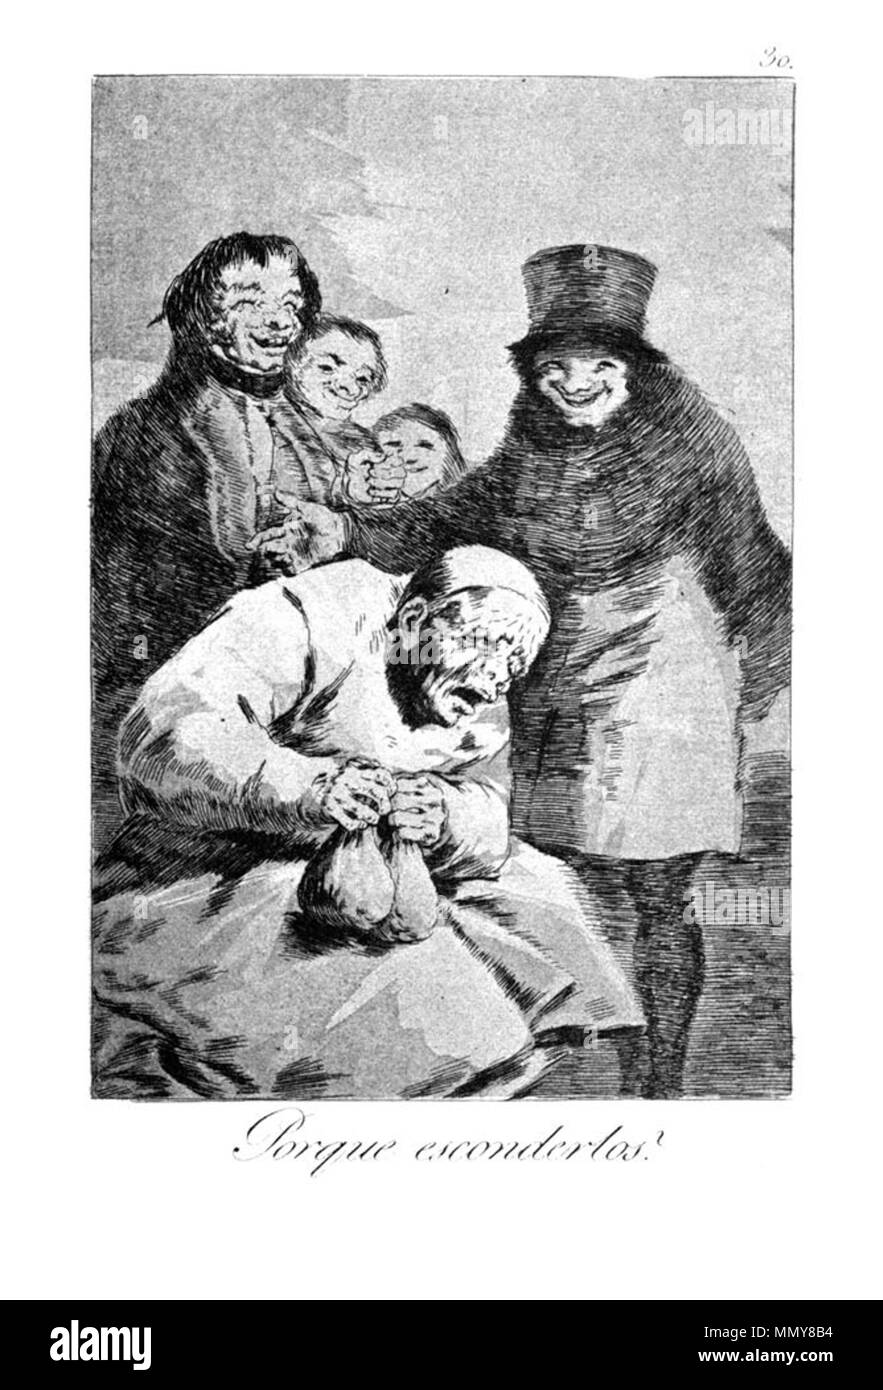 . Los Caprichos is a set of 80 aquatint prints created by Francisco Goya for release in 1799.  . 1799.   Francisco Goya  (1746–1828)      Alternative names Francisco Goya Lucientes, Francisco de Goya y Lucientes, Francisco José Goya Lucientes  Description Spanish painter, printmaker, lithographer, engraver and etcher  Date of birth/death 30 March 1746 16 April 1828  Location of birth/death Fuendetodos Bordeaux  Work location Madrid, Zaragoza, Bordeaux  Authority control  : Q5432 VIAF:?54343141 ISNI:?0000 0001 2280 1608 ULAN:?500118936 LCCN:?n79003363 NLA:?36545788 WorldCat Goya - Caprichos (30 Stock Photo